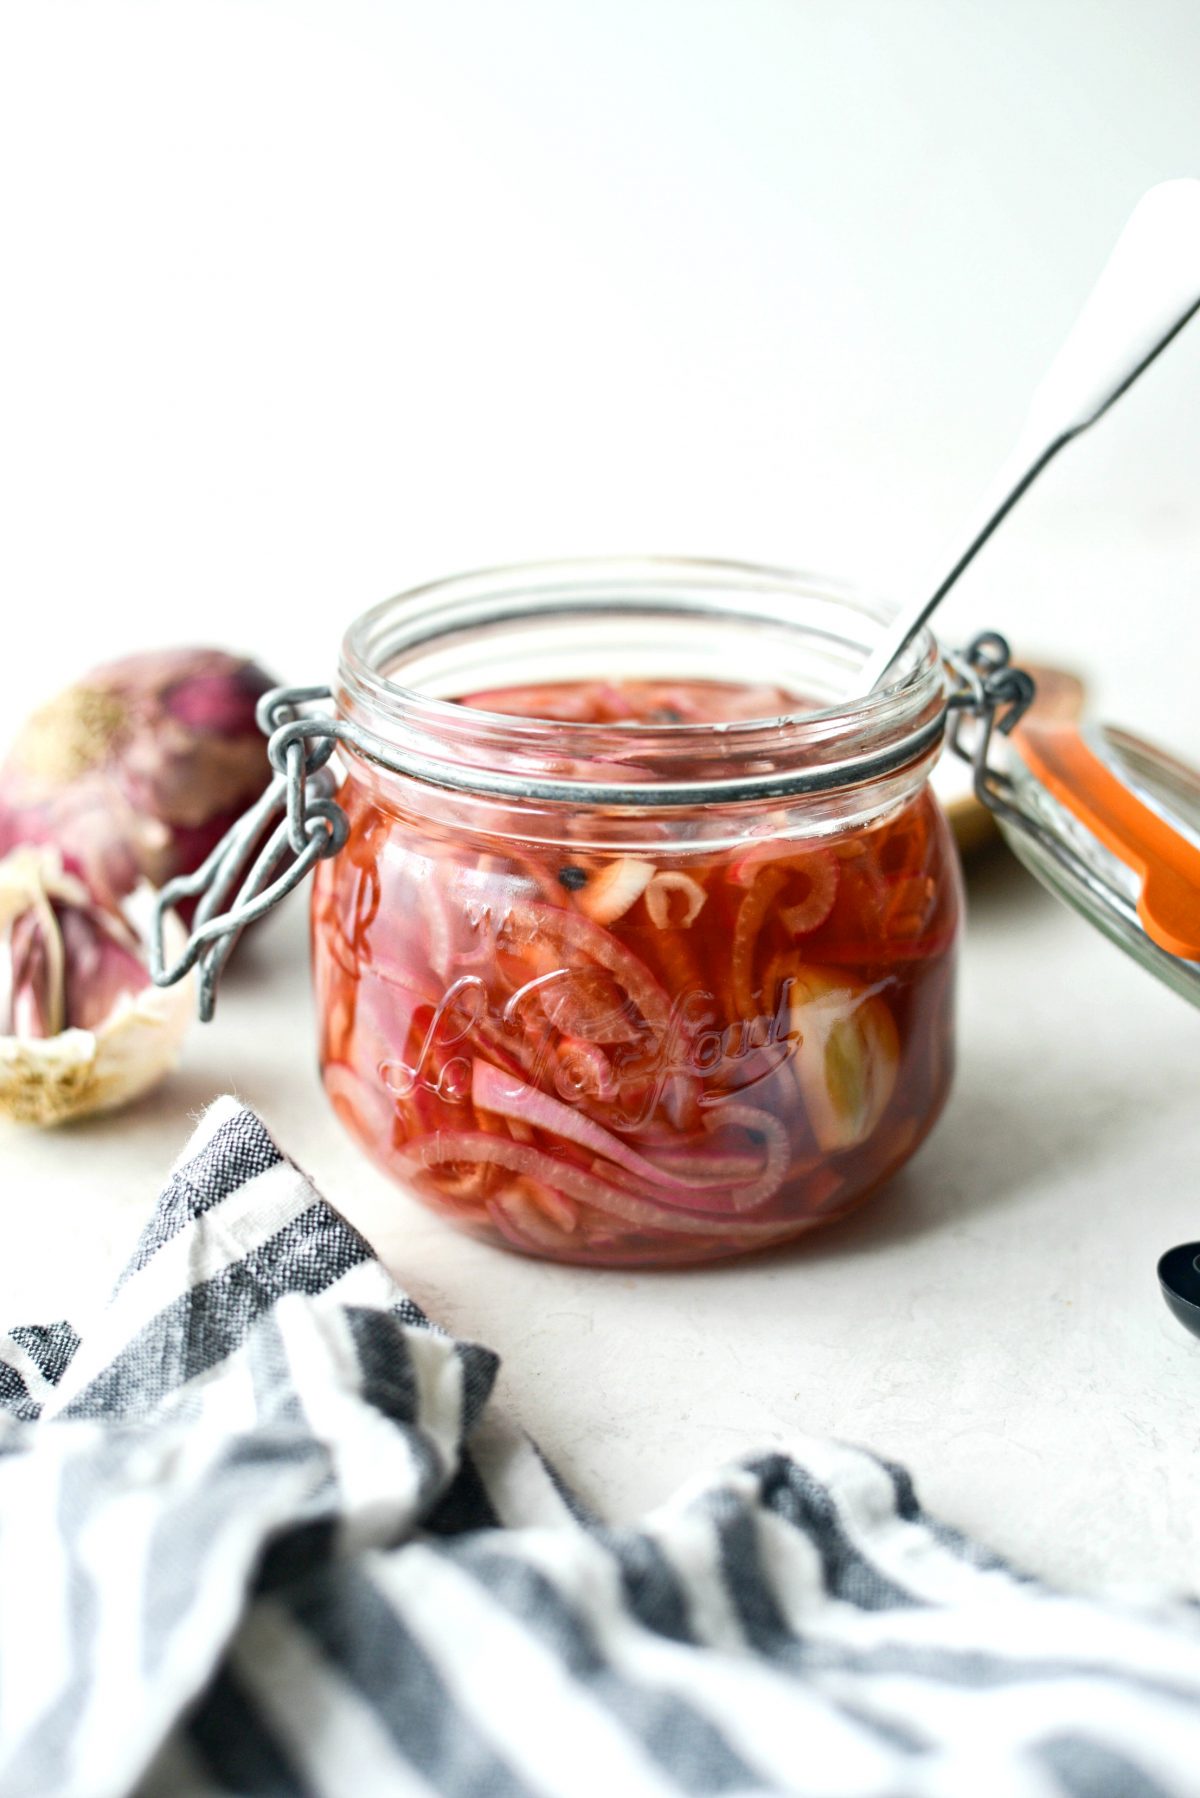 Quick Pickled Red Onions l SimplyScratch.com #homemade #pickled #redonions #condiments #preserving #pickling